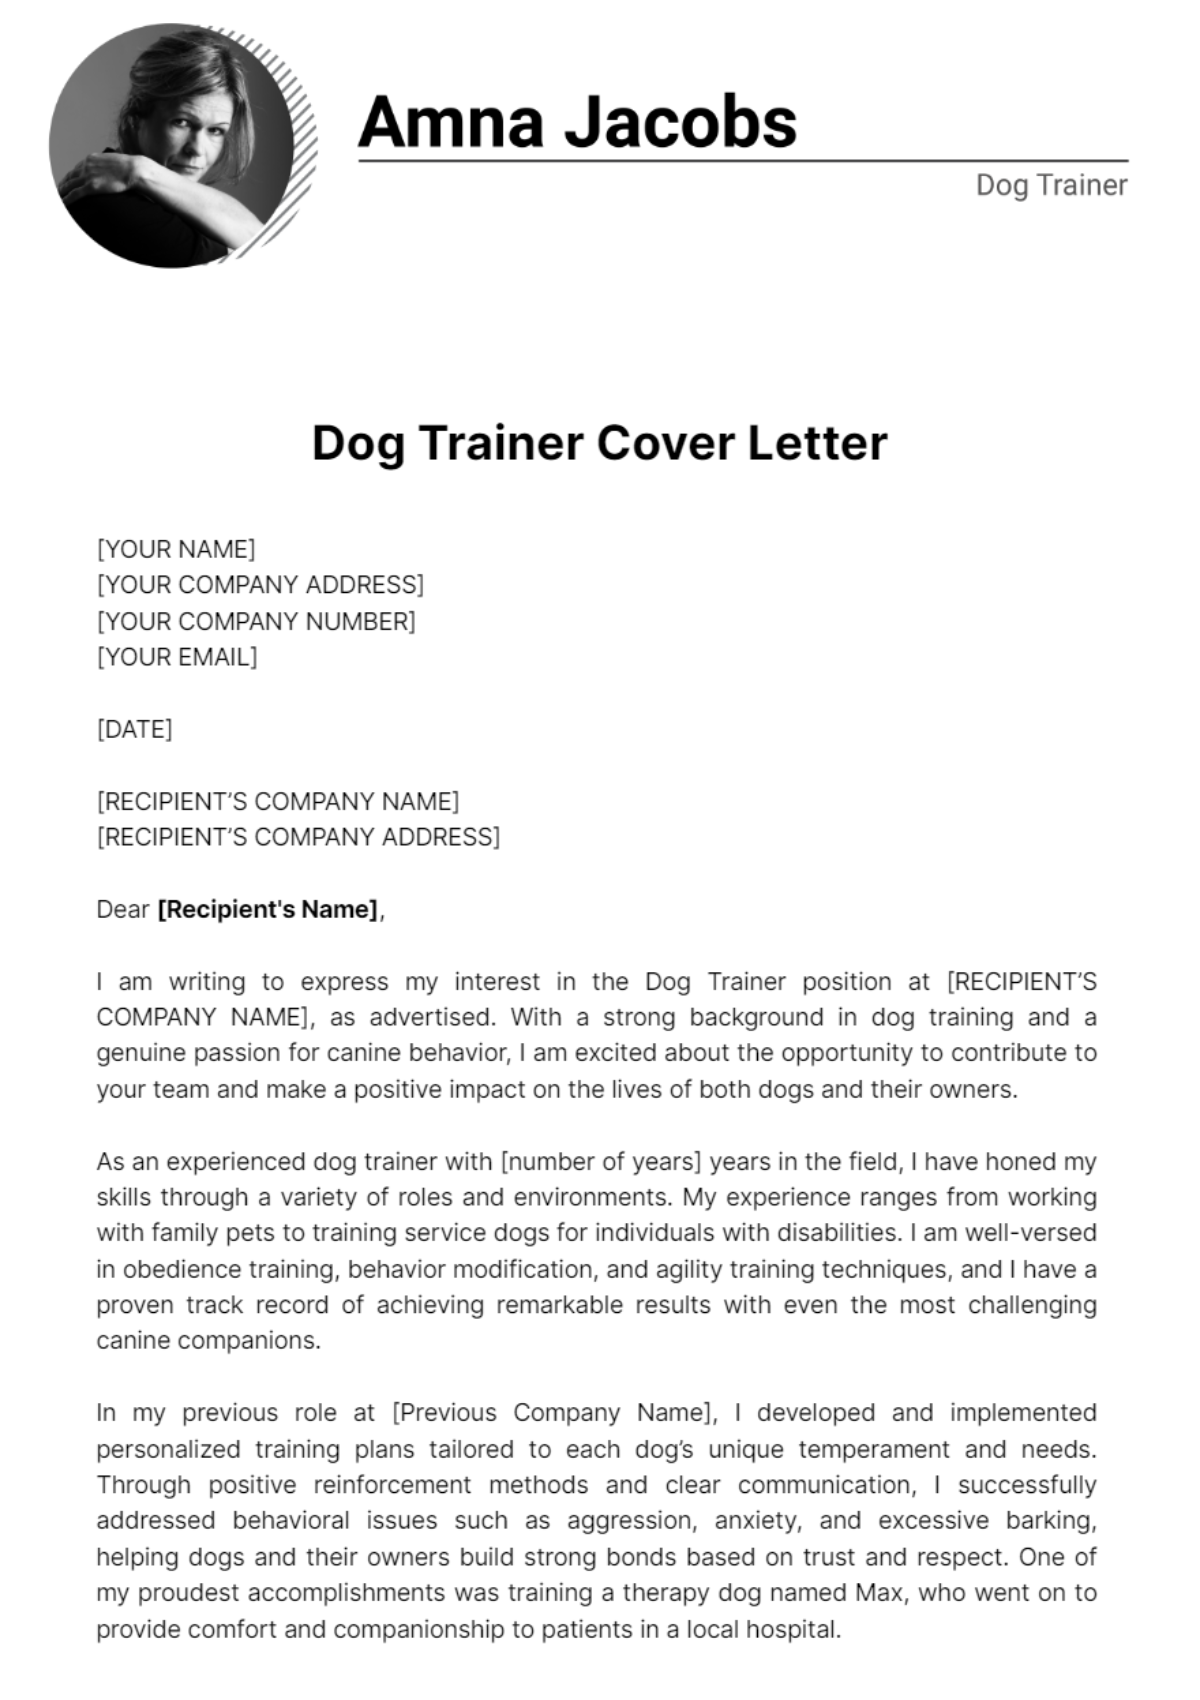 Dog Trainer Cover Letter Template